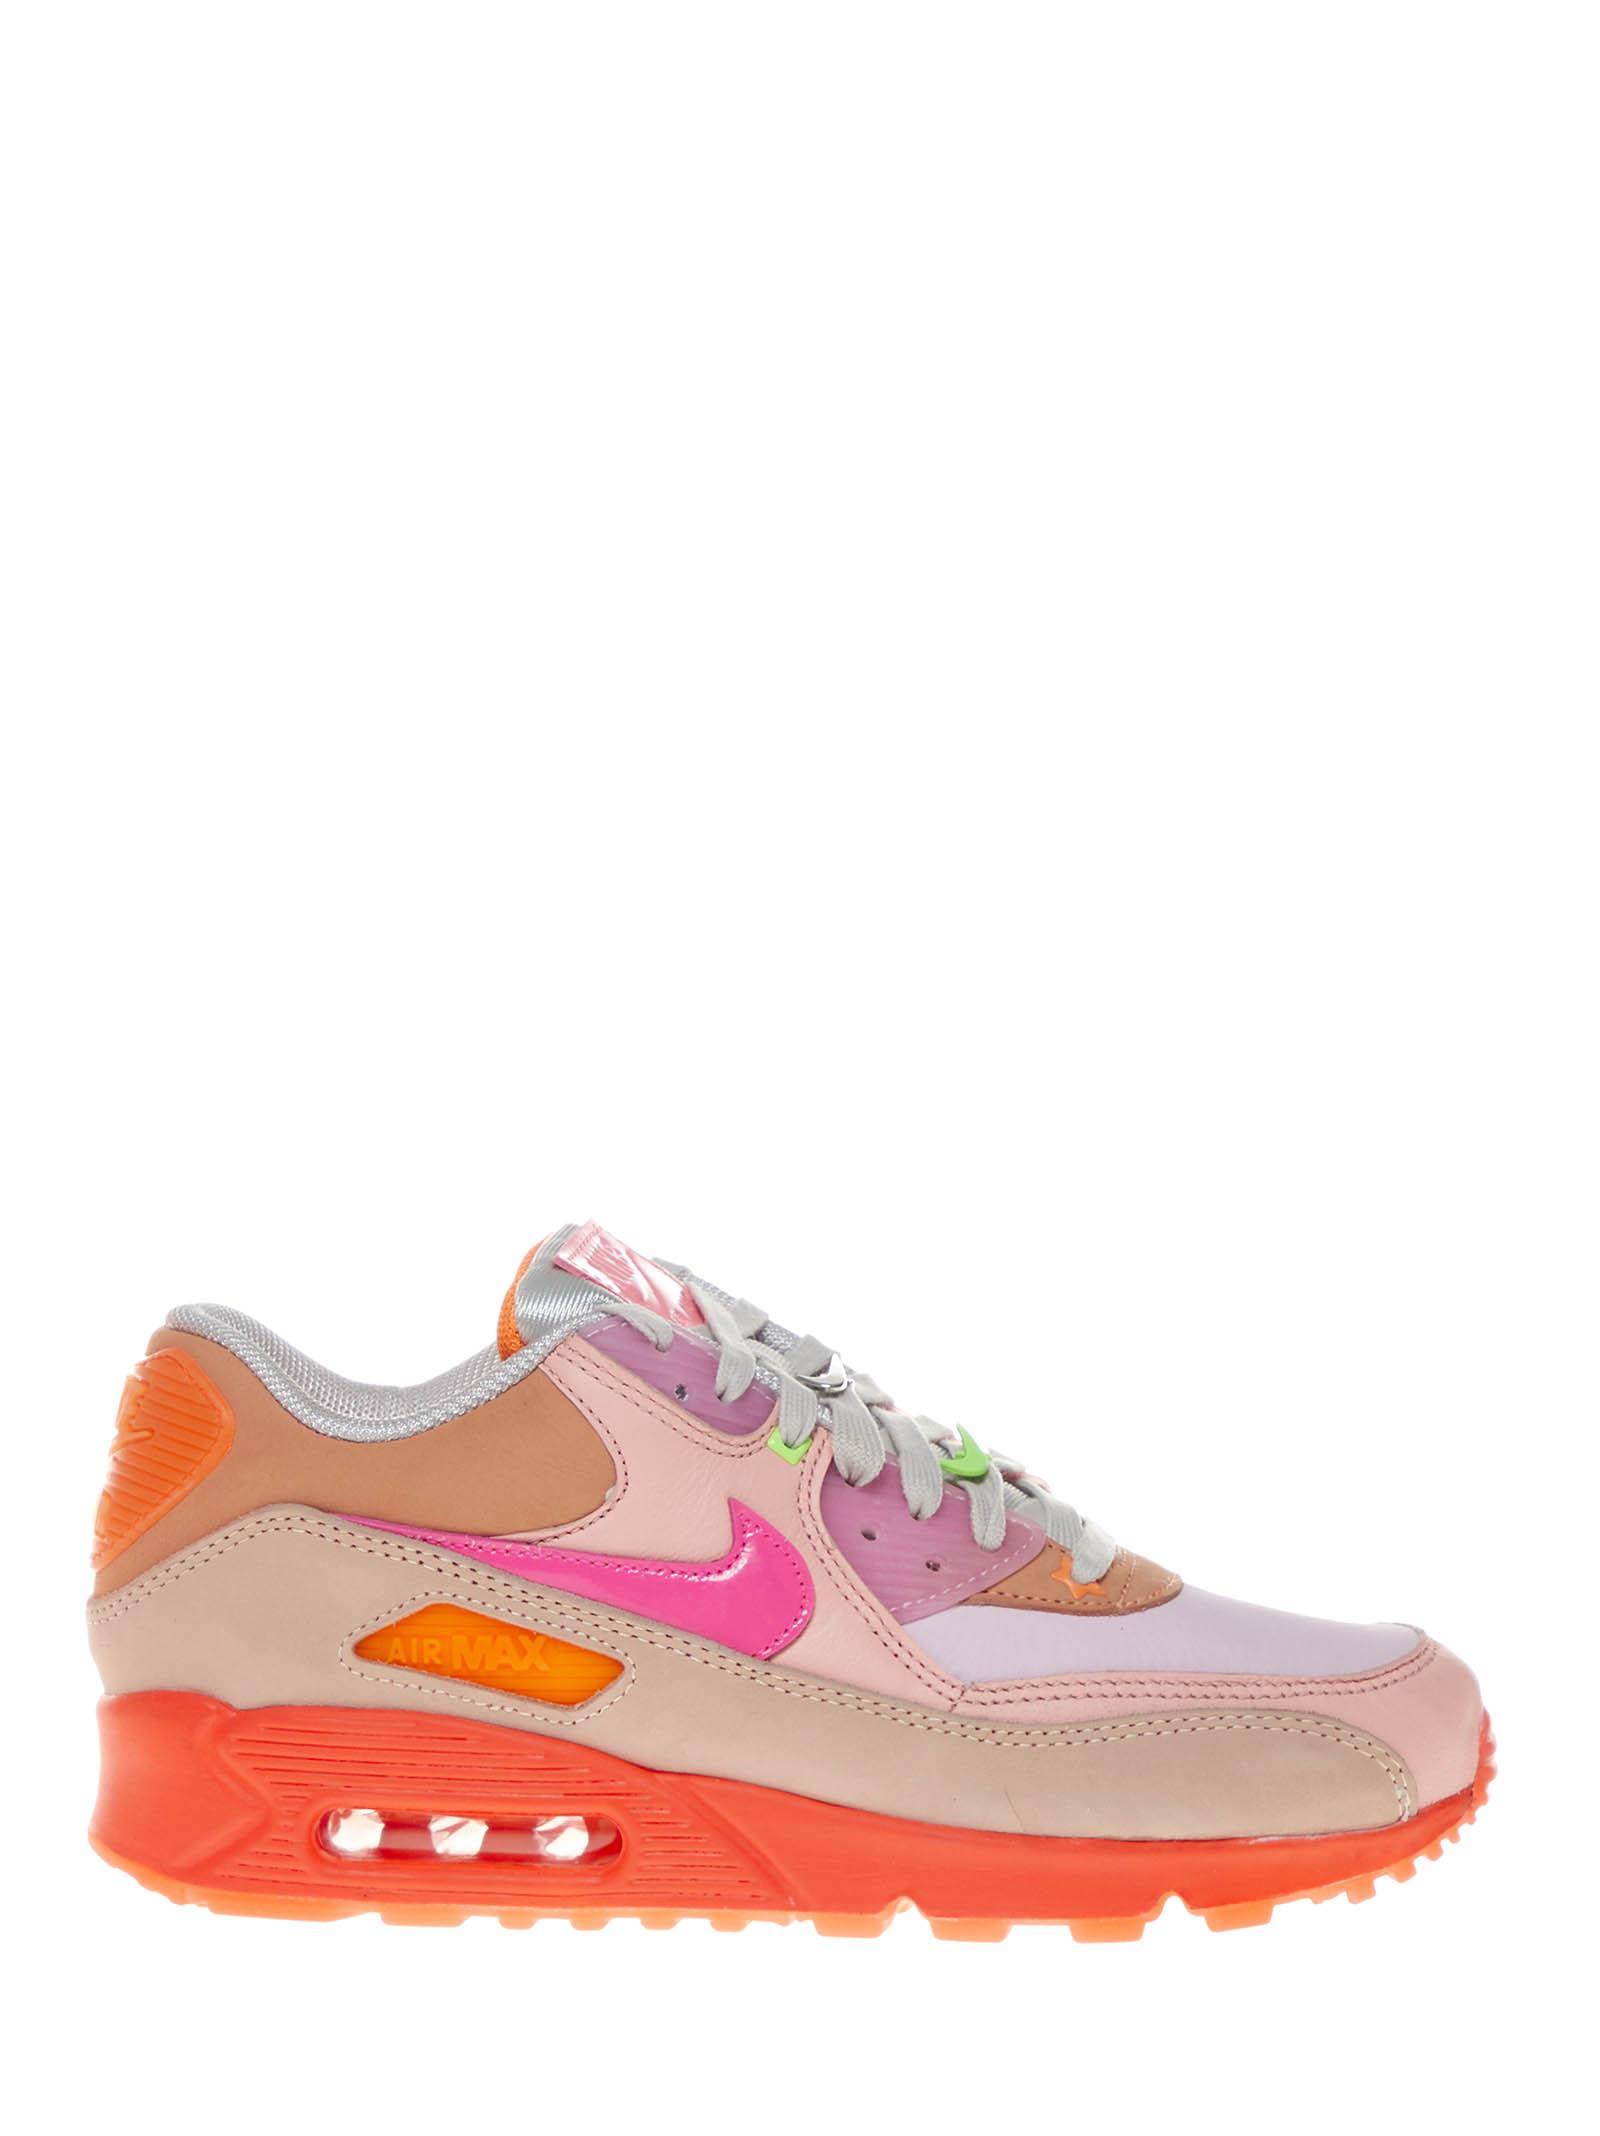 Nike Pink And Orange Max 90 Sneakers With Layered Design And Air Technology. Lyst